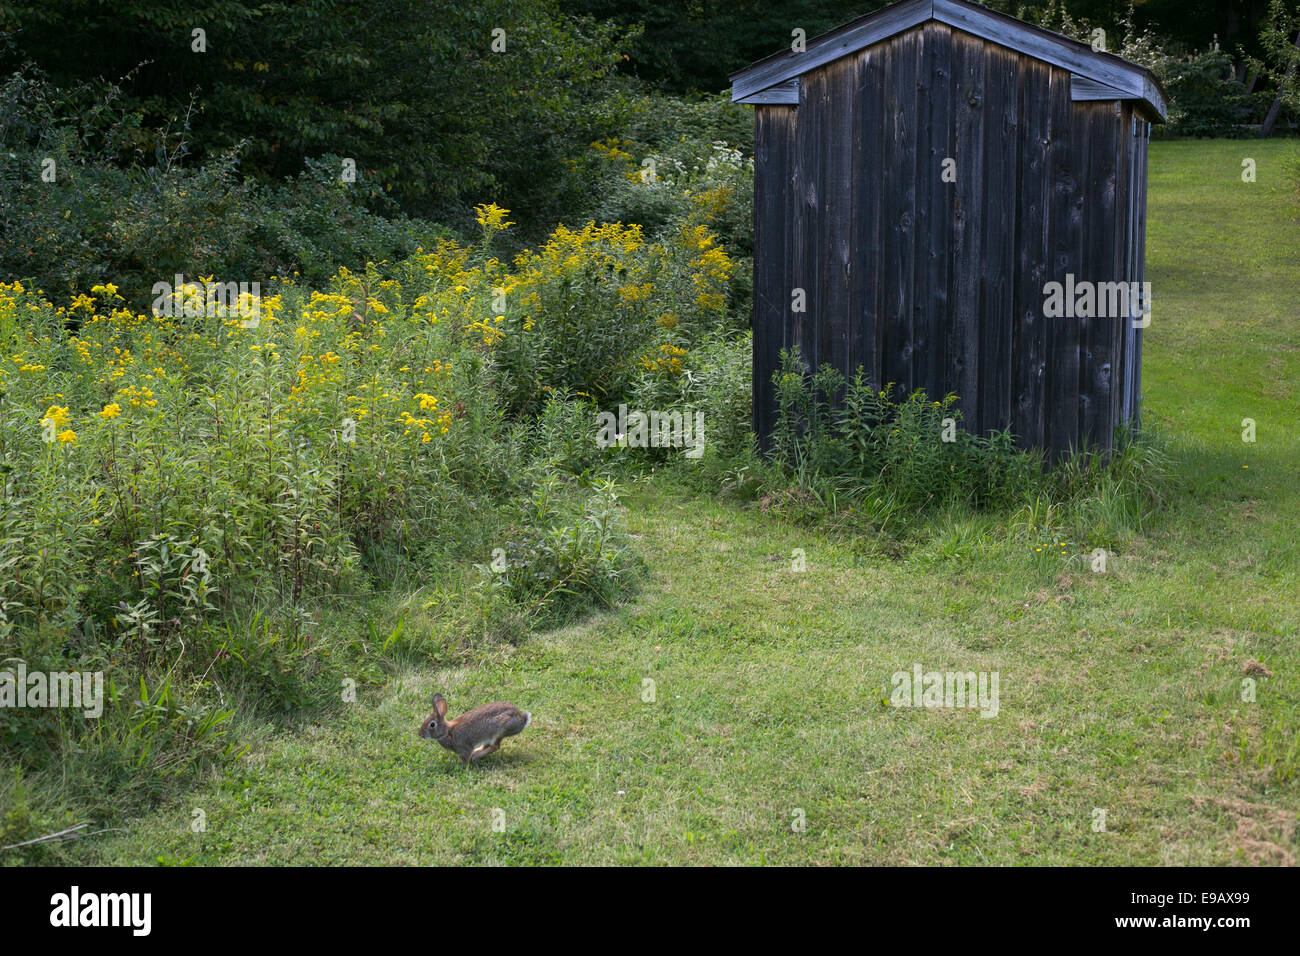 Hopping rabbit and wood shed on the lawn. Stock Photo